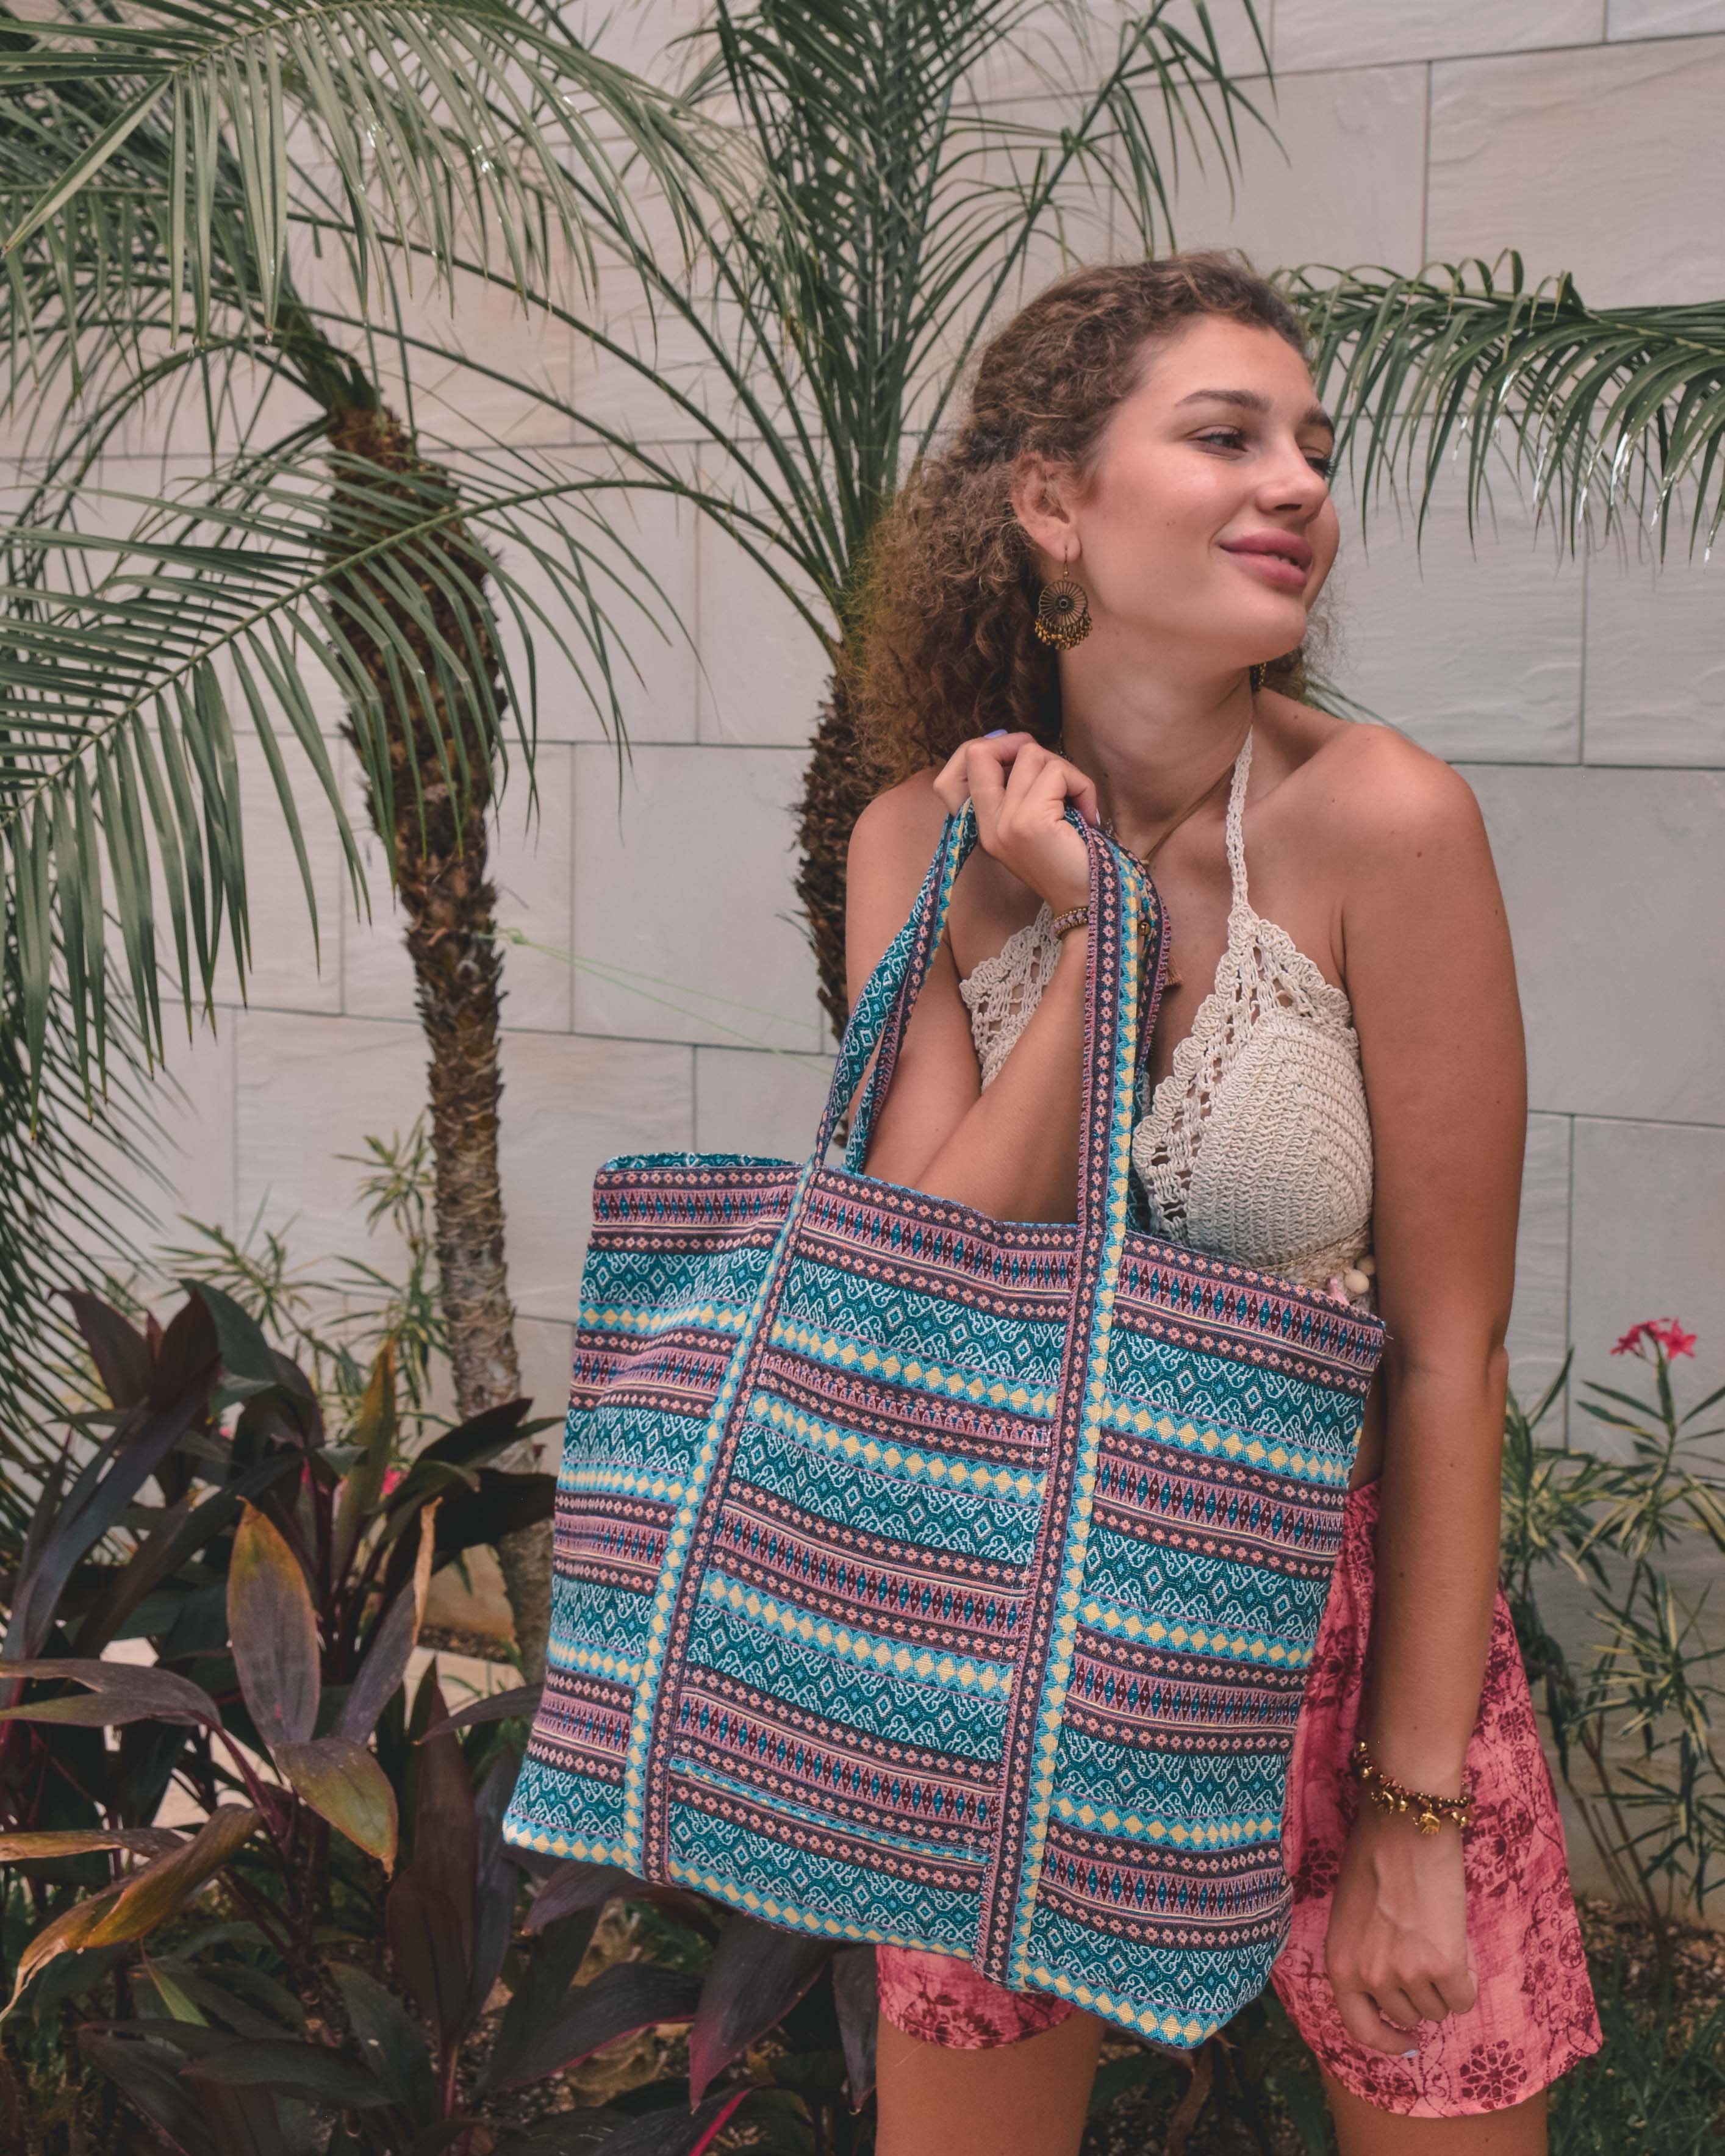 ZAYED BEACH BAG Elepanta Beach Bags - Buy Today Elephant Pants Jewelry And Bohemian Clothes Handmade In Thailand Help To Save The Elephants FairTrade And Vegan